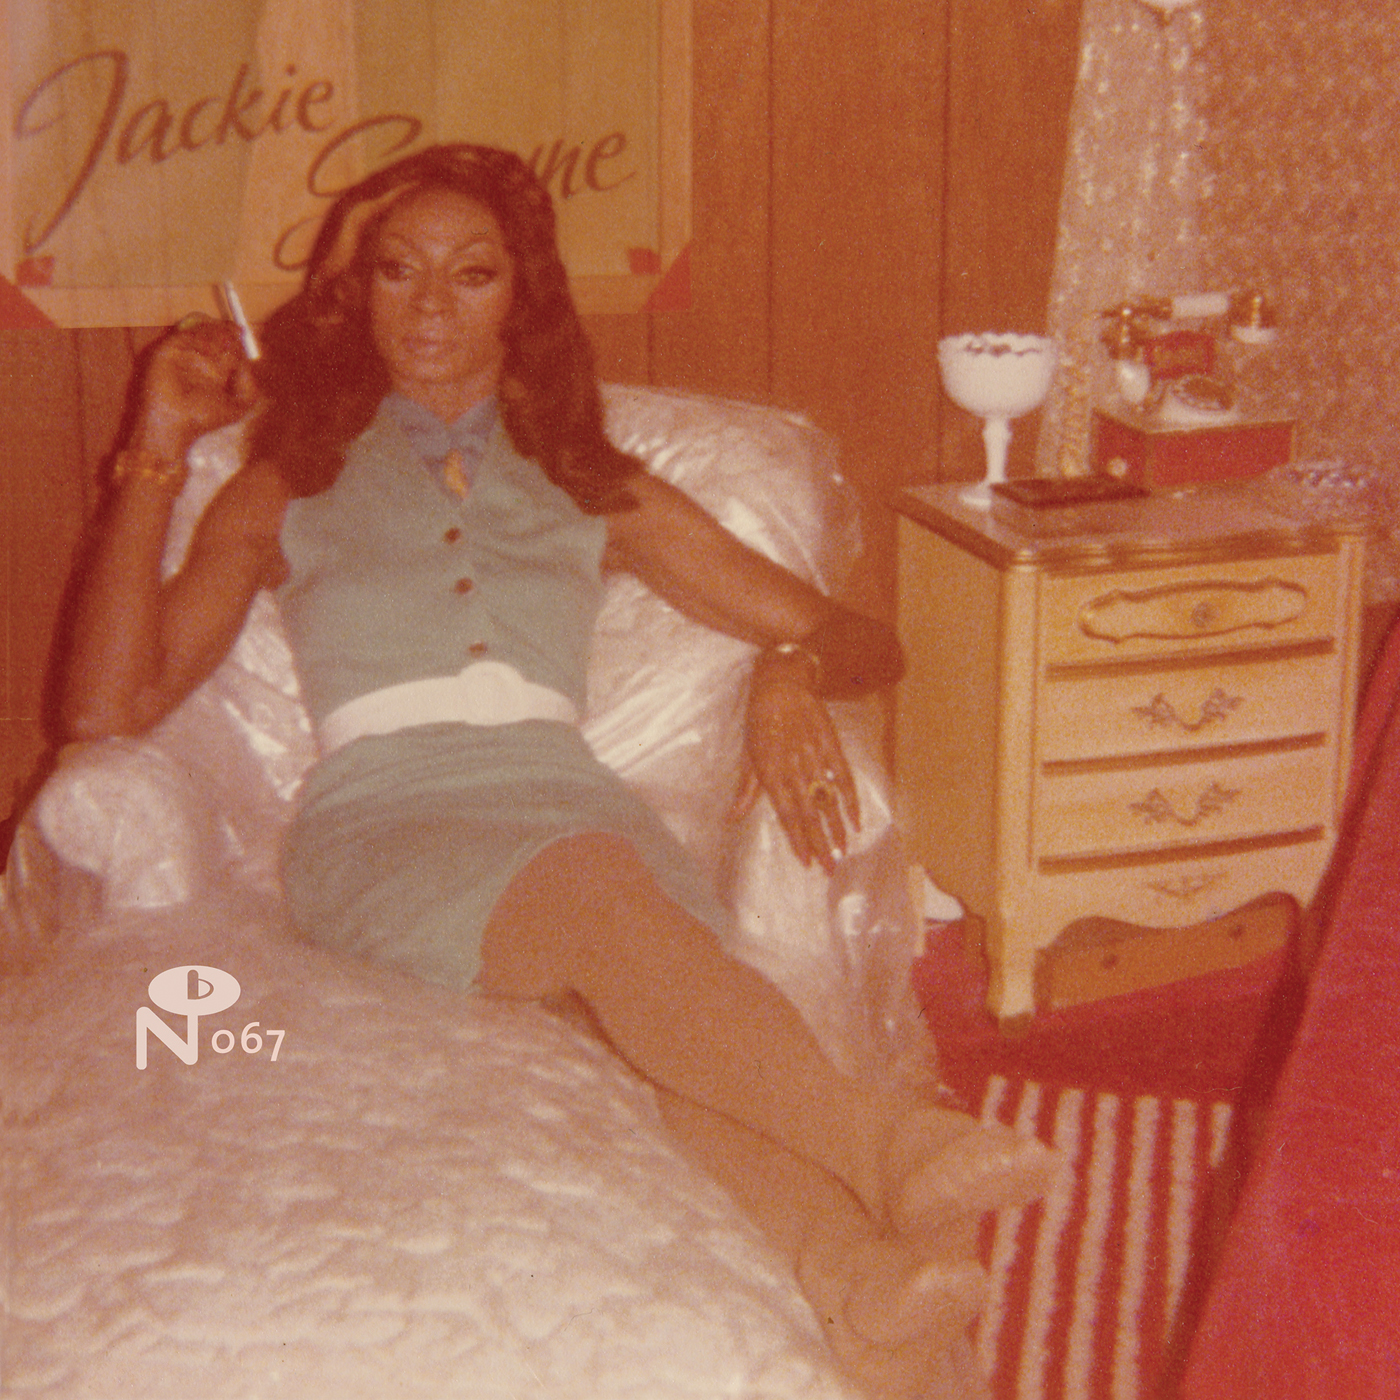 Jackie Shane - Any Other Way - 2xCD